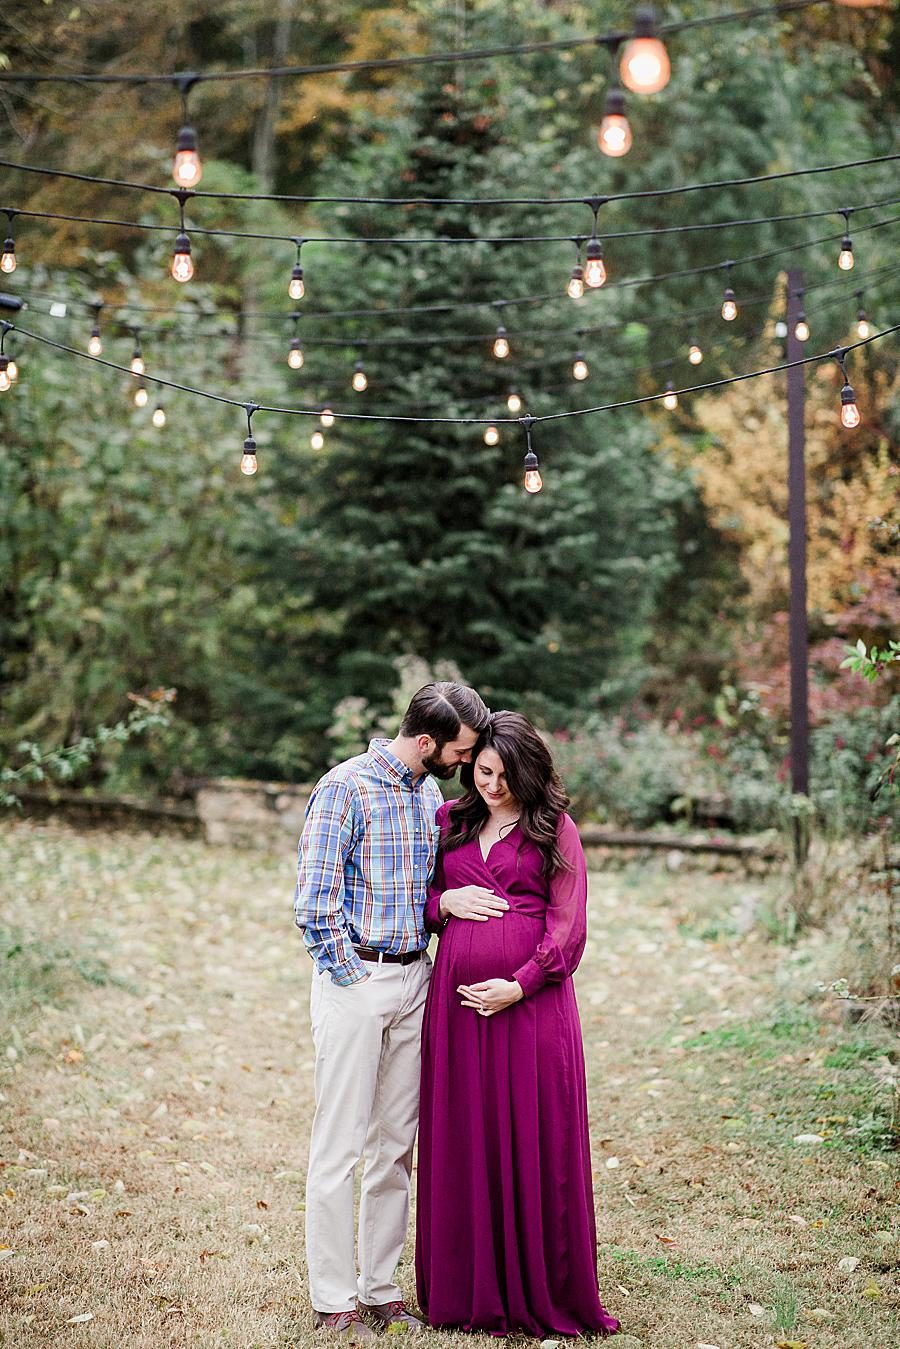 Outdoor Edison Bulbs at this Natchez Trace Glen Maternity by Knoxville Wedding Photographer, Amanda May Photos.